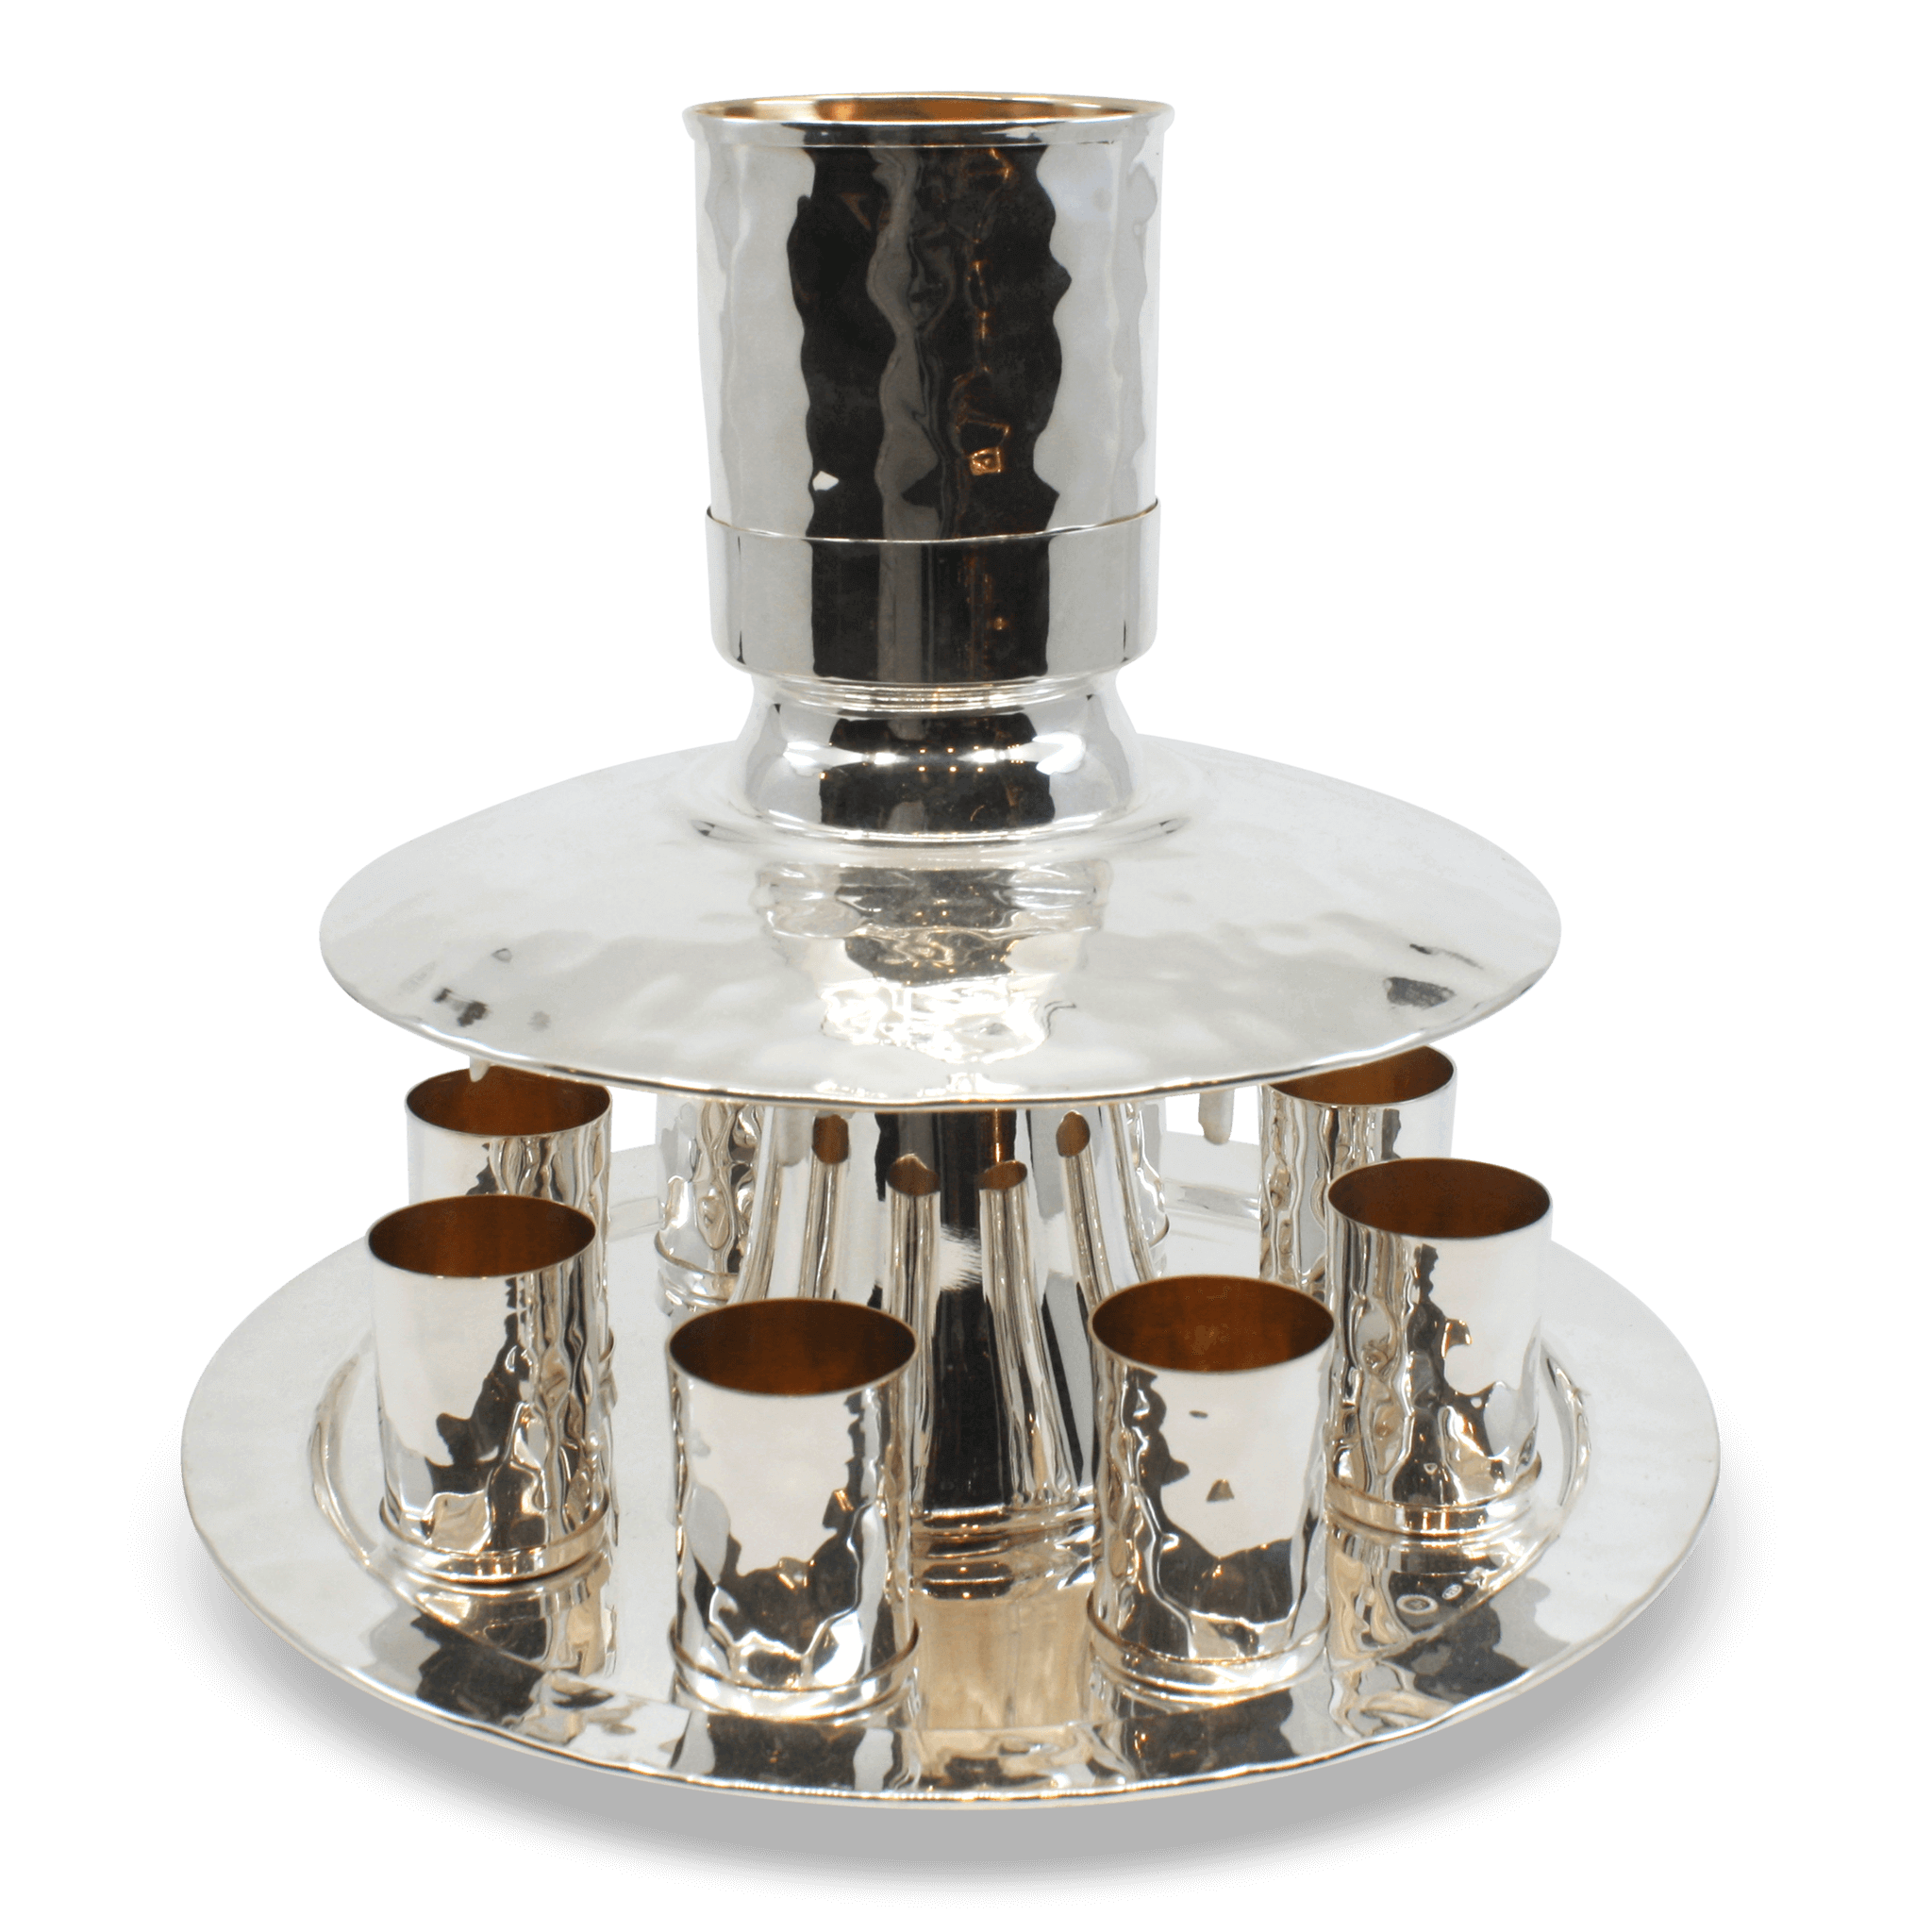 Softly hammered wine fountain for 8 - Piece By Zion Hadad